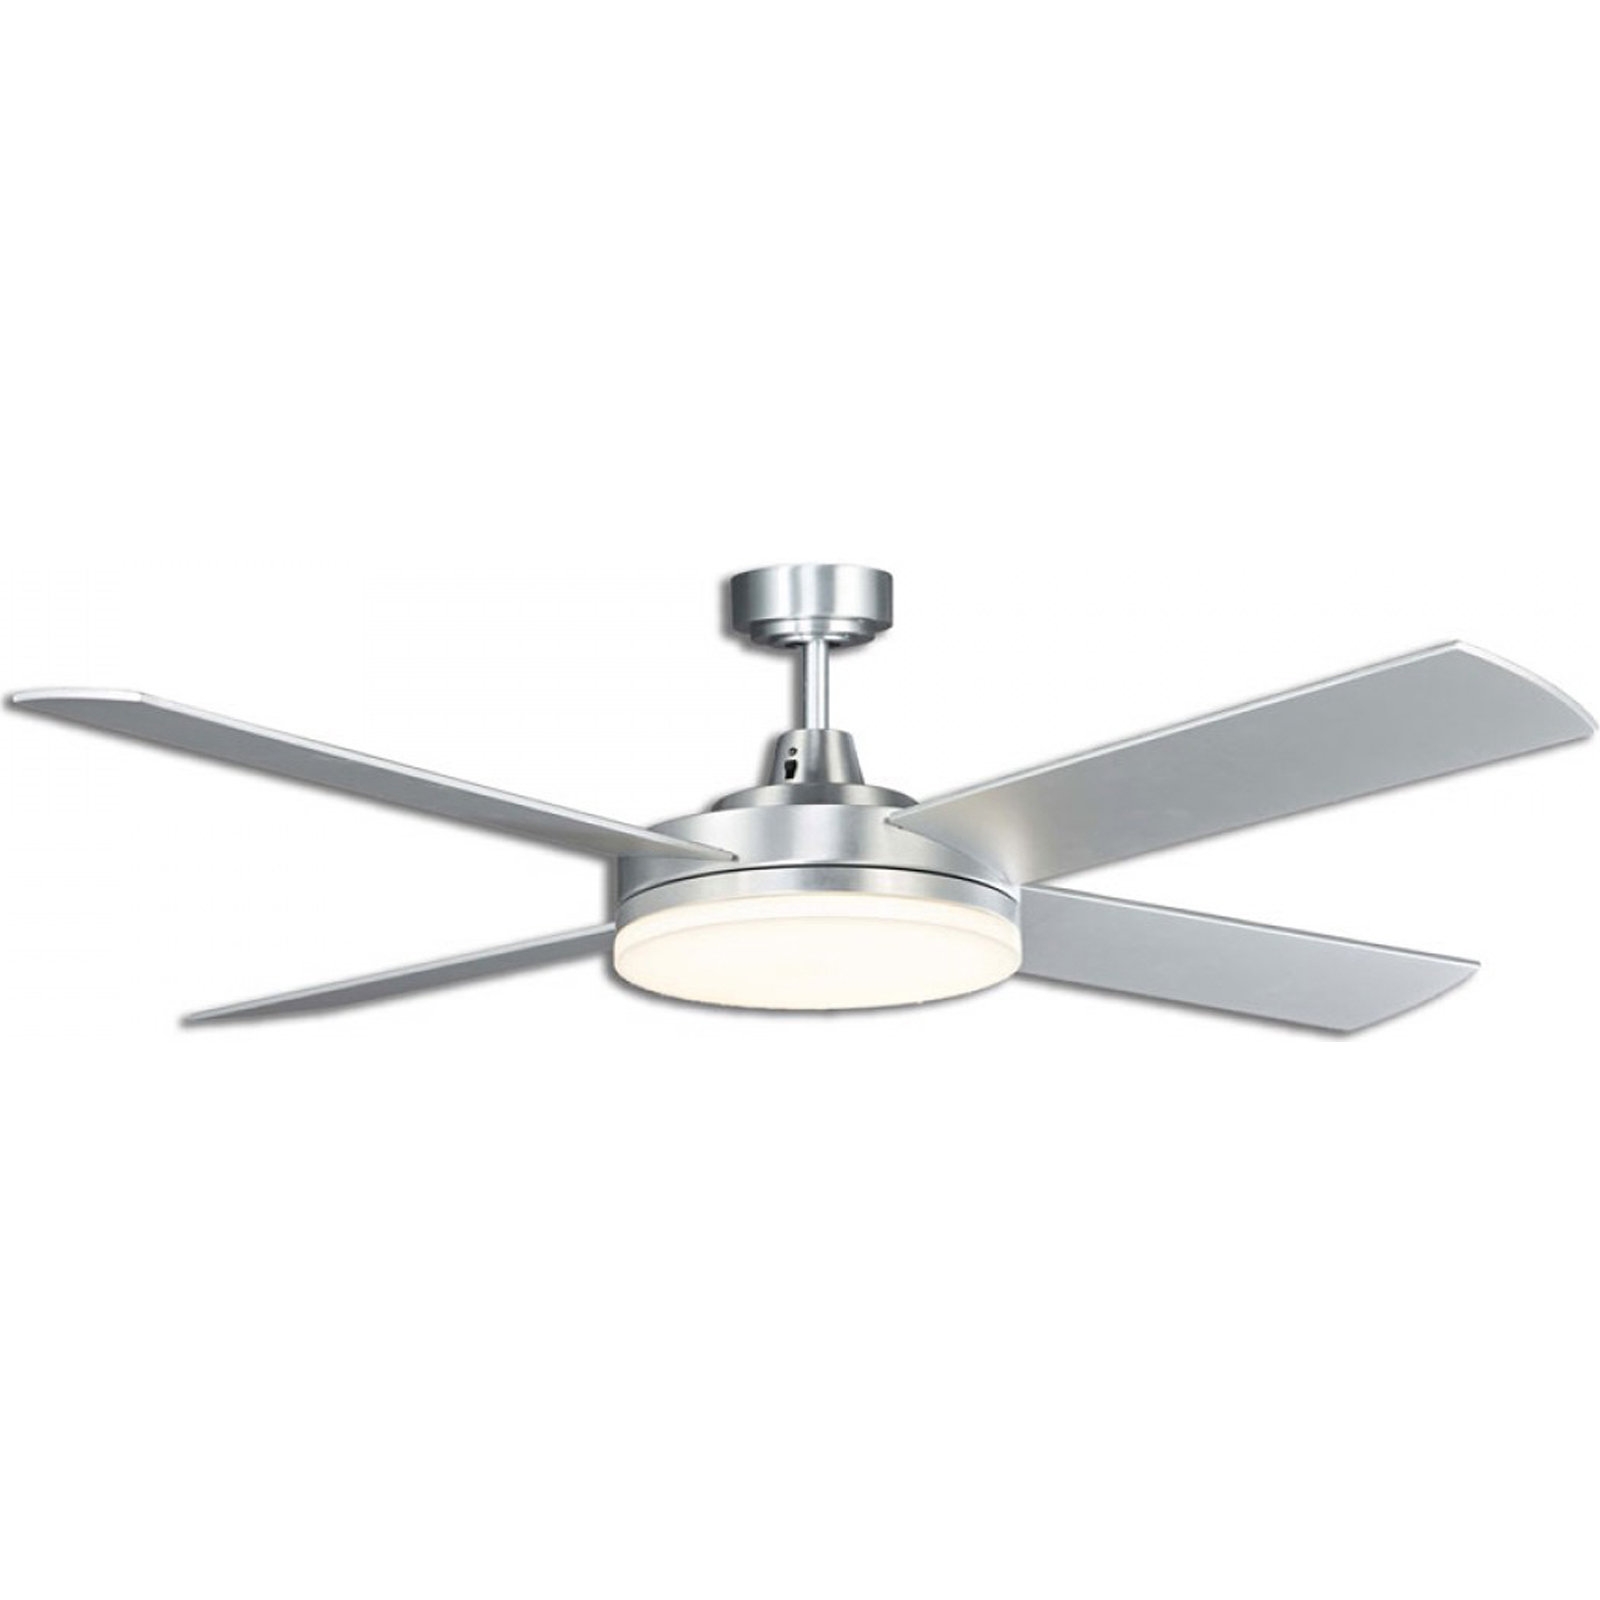 Permalink to Low Profile Ceiling Fans With Led Lights